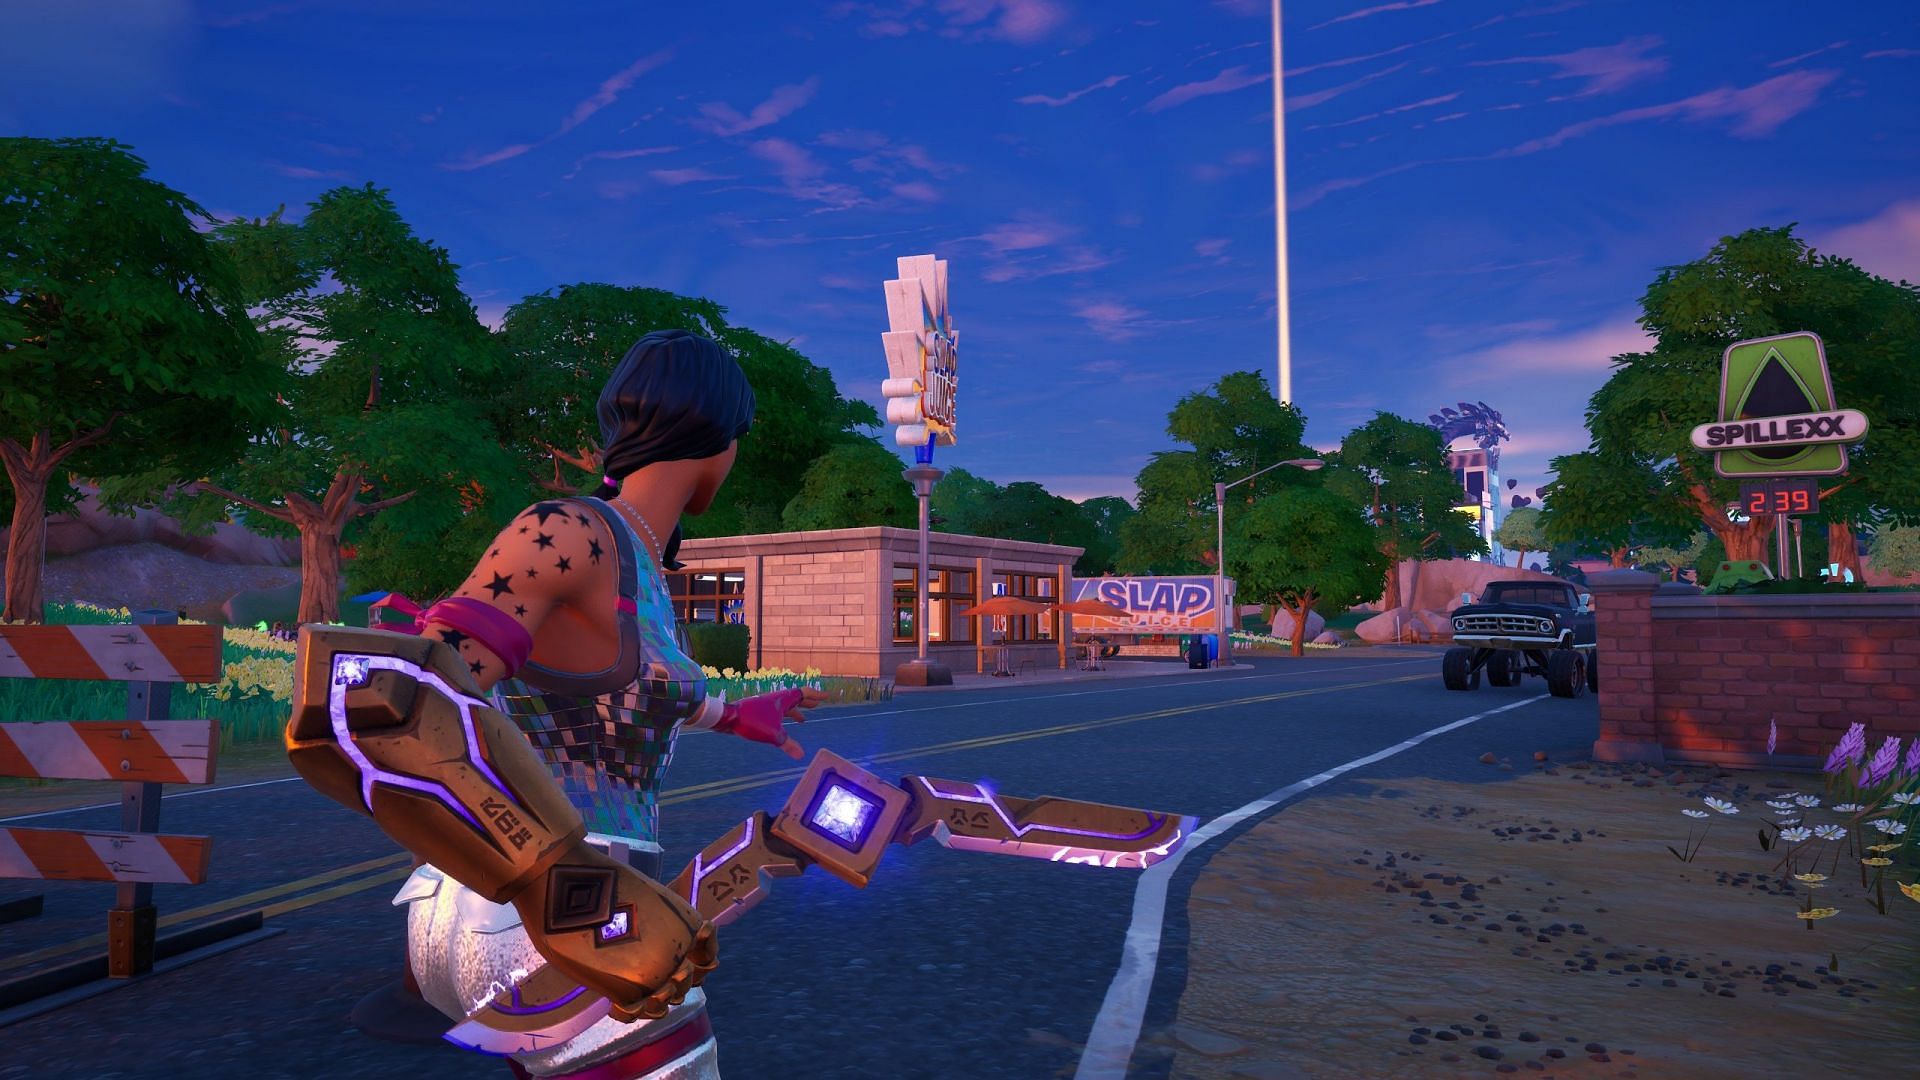 The boomerang deals 60 damage to players (Image via Epic Games)